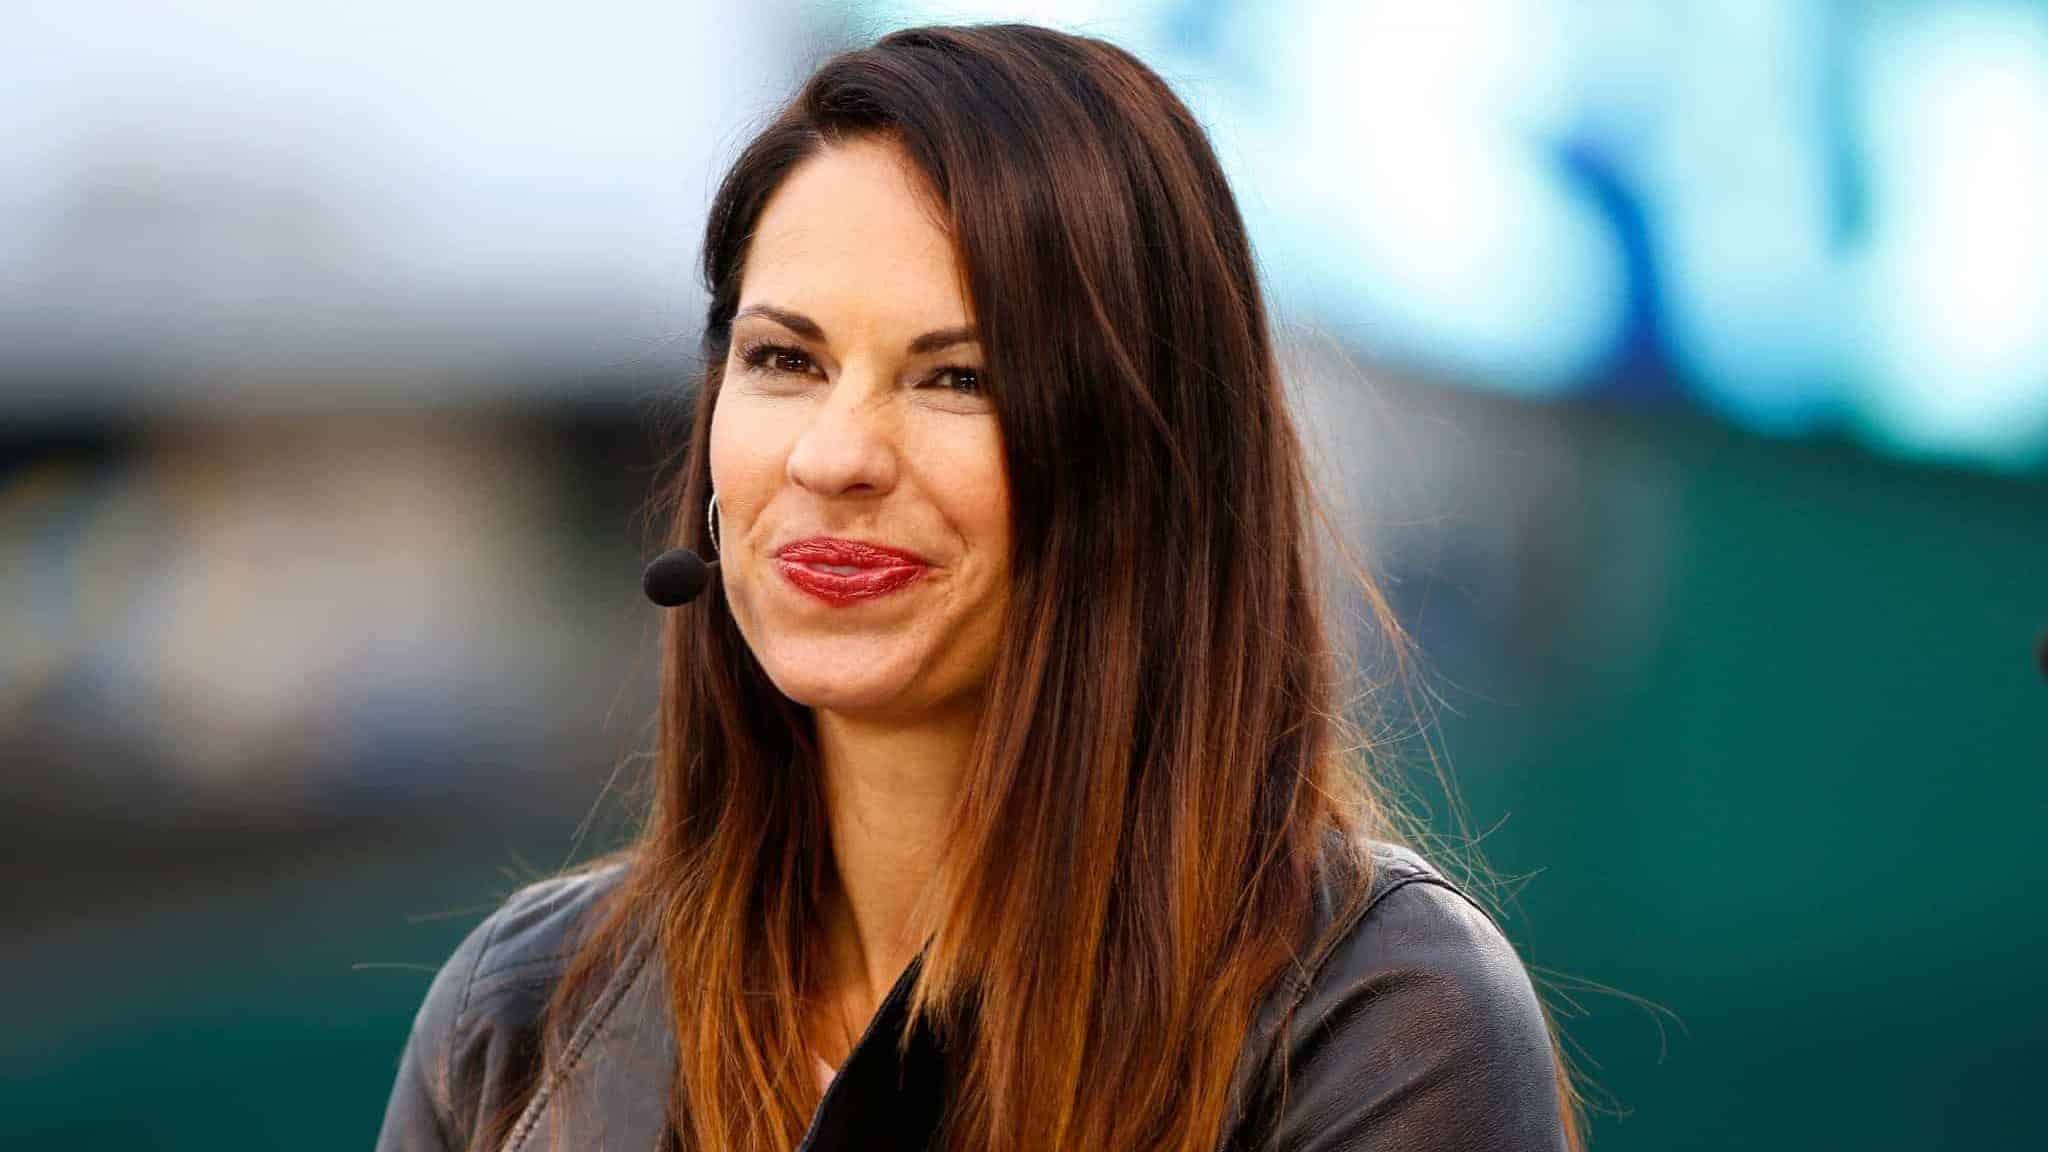 KANSAS CITY, MO - OCTOBER 26: Jessica Mendoza of ESPN speaks on set the day before Game 1 of the 2015 World Series between the Royals and Mets at Kauffman Stadium on October 26, 2015 in Kansas City, Missouri.